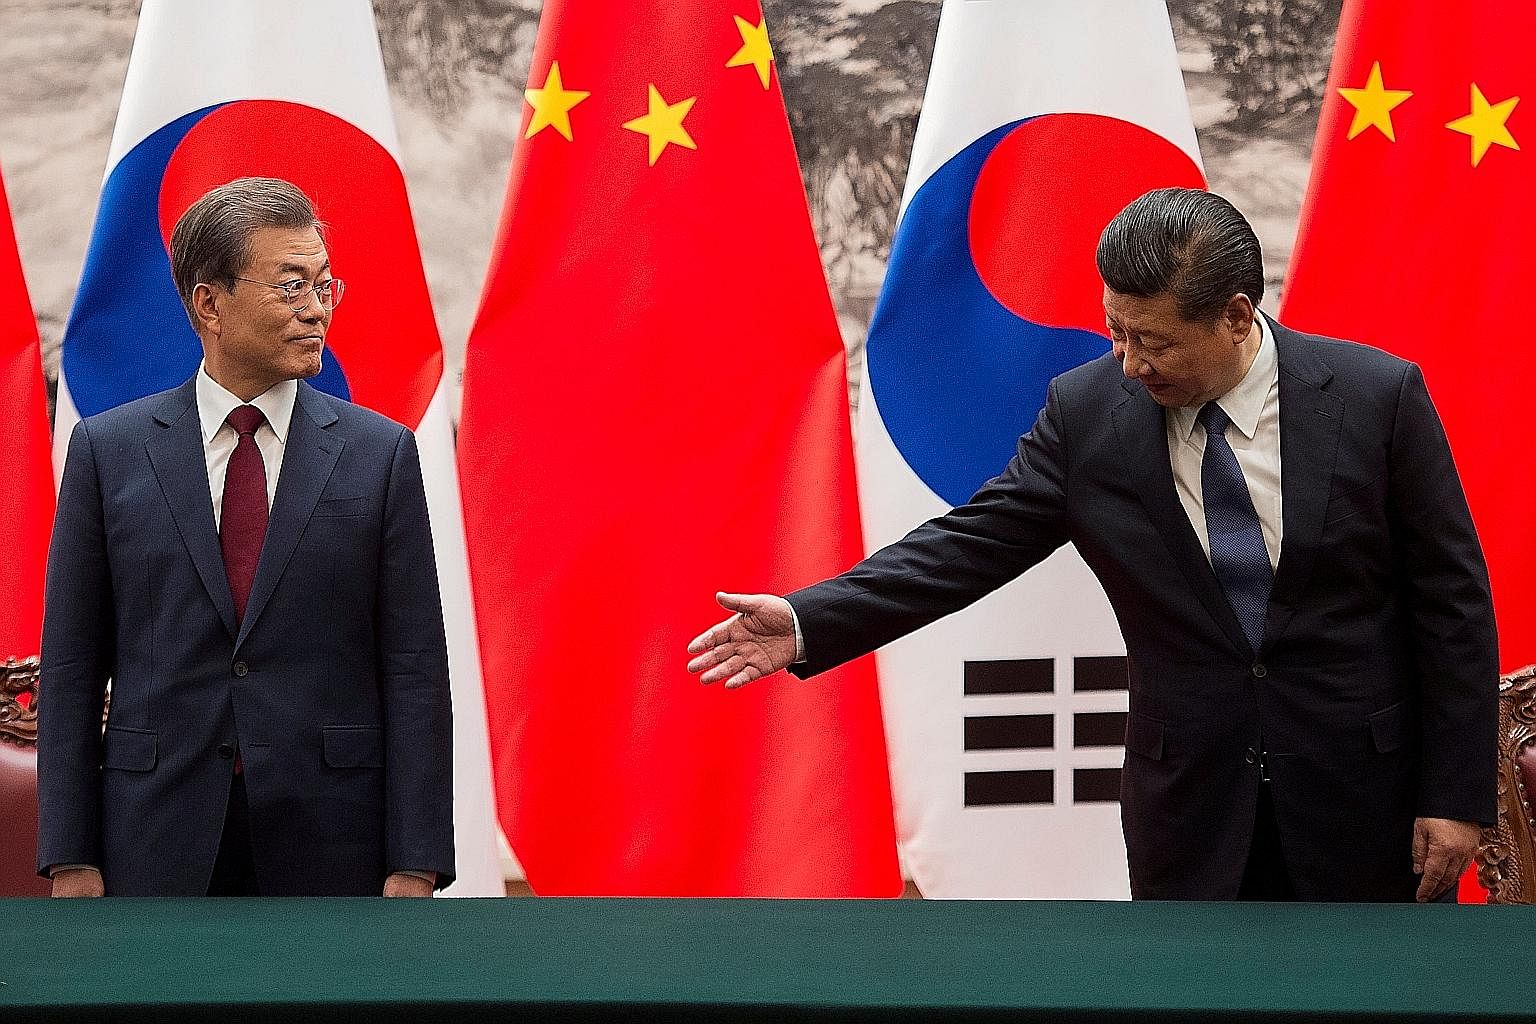 Chinese President Xi Jinping (right) with South Korean President Moon Jae In at a signing ceremony at the Great Hall of the People in Beijing on Thursday. The two leaders have pledged to improve bilateral ties and work to resolve the North Korean nuc